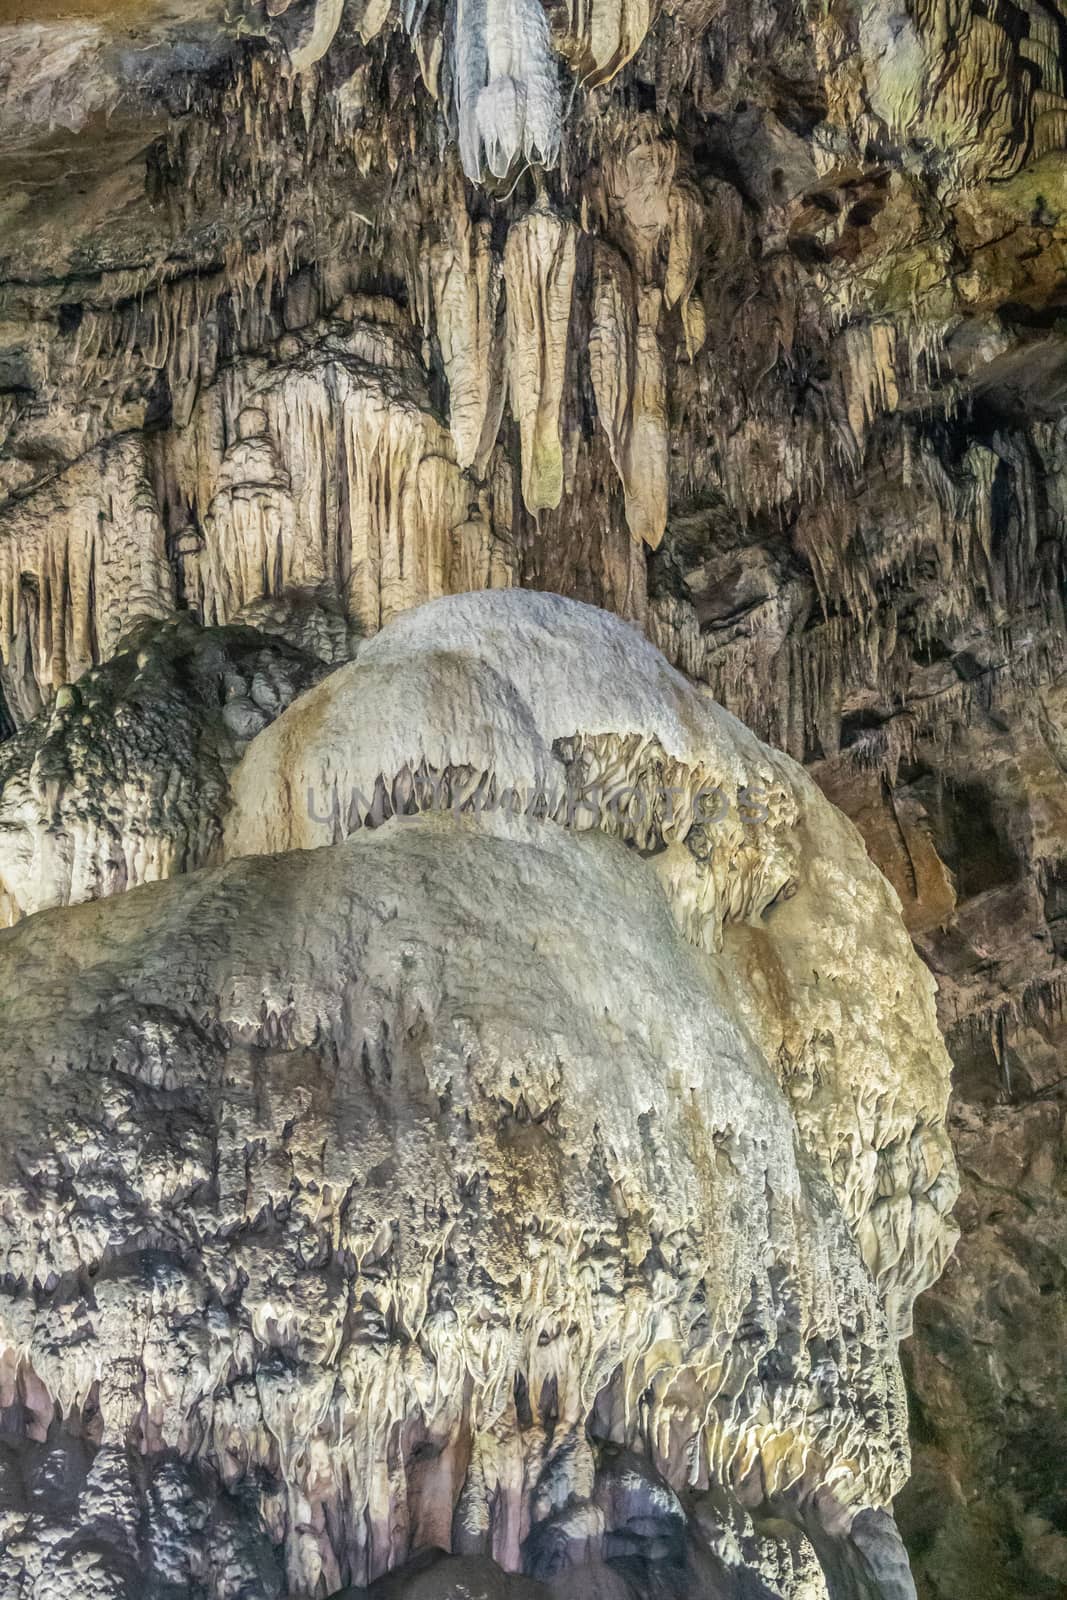 Han-sur-Lesse, Belgium - June 25, 2019: Grottes-de-Han 23 of 36. subterranean pictures of Stalagmites and stalactites in different shapes and colors throughout tunnels, caverns and large halls..